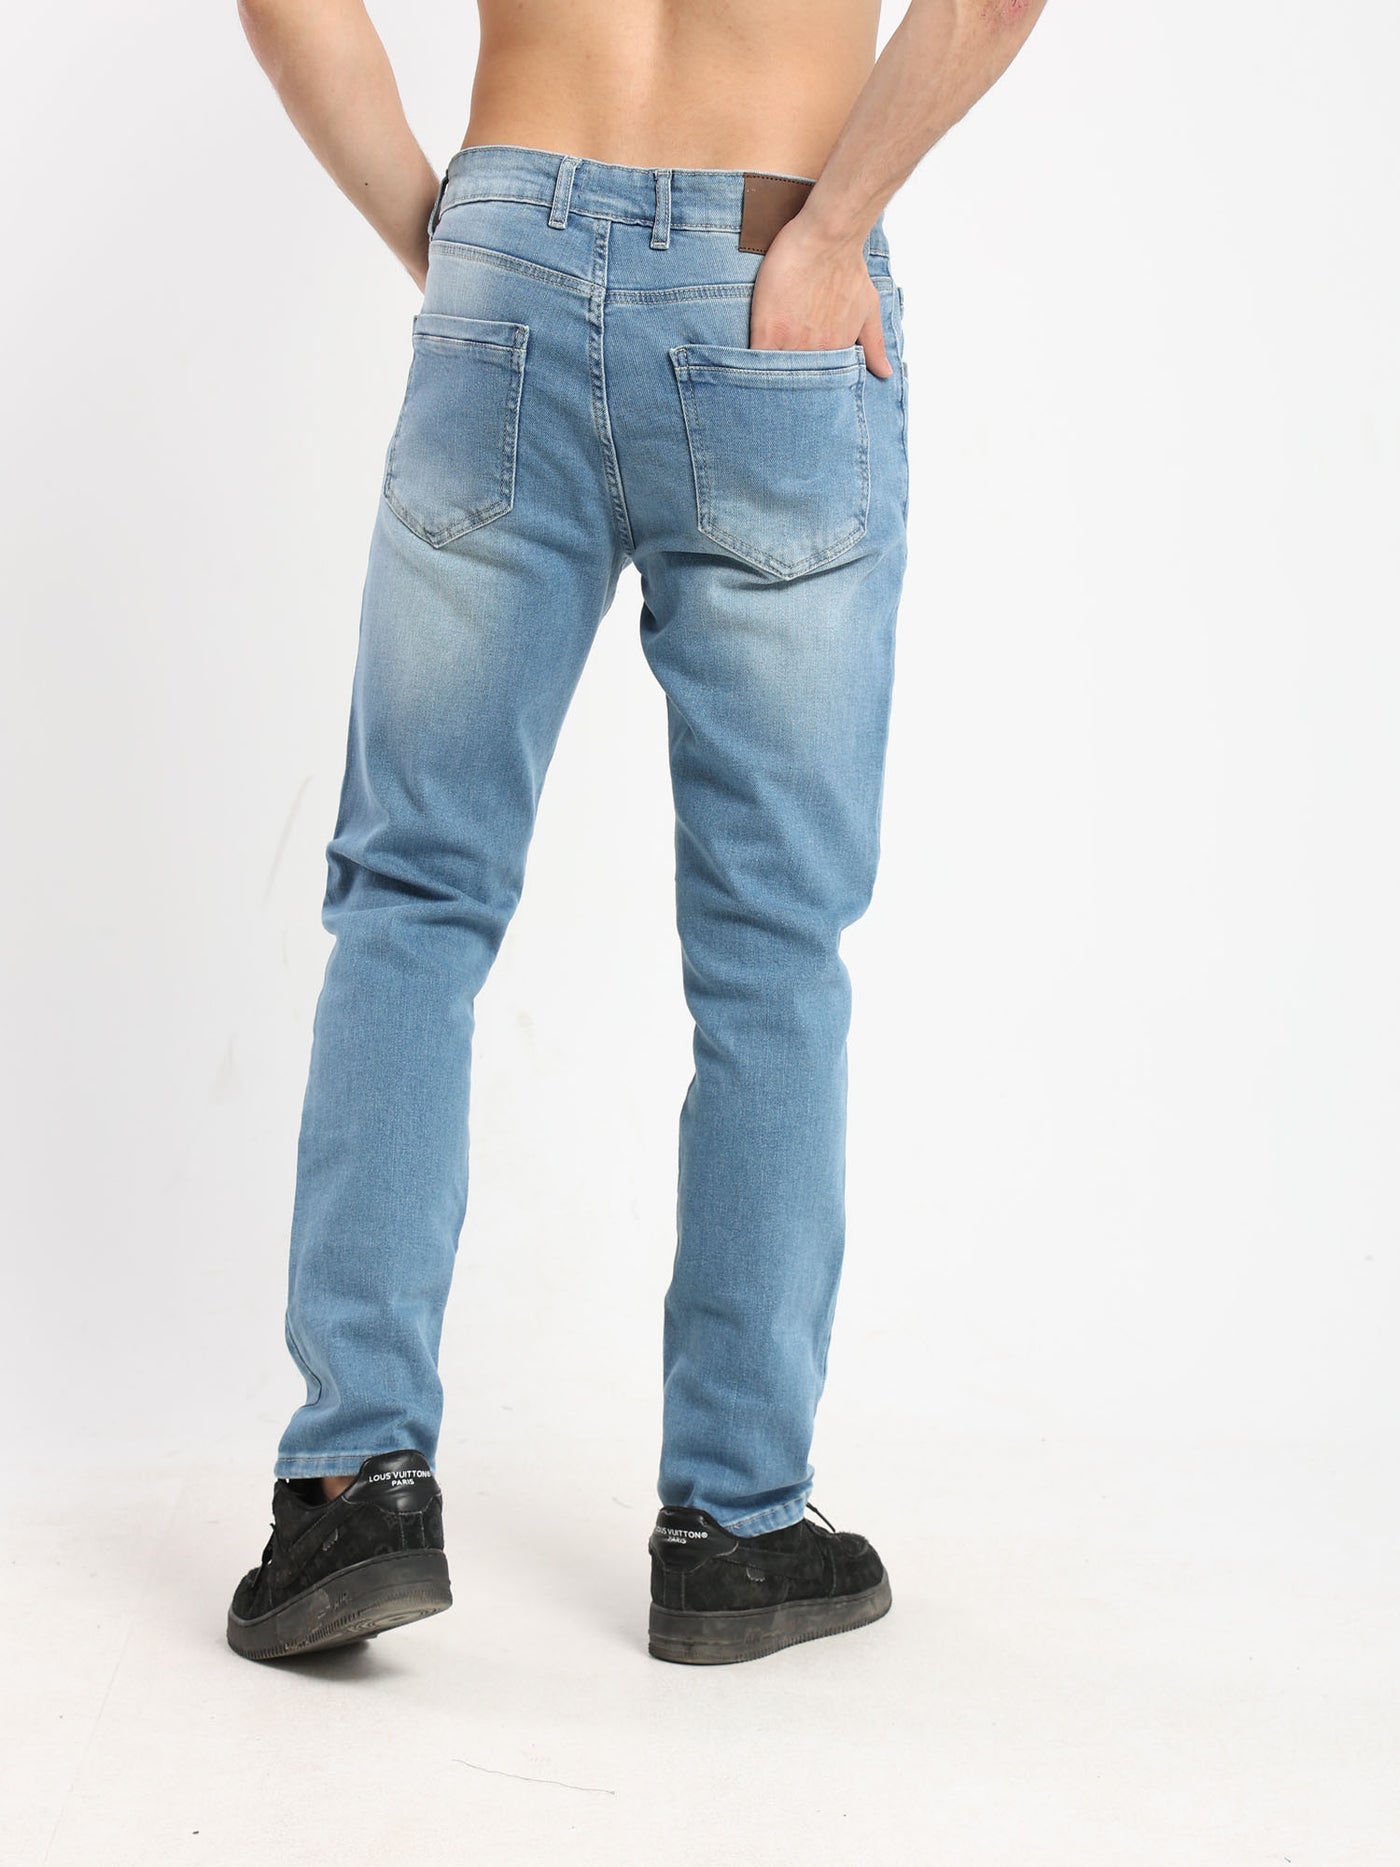 Jeans - Regular Fit - With Pockets